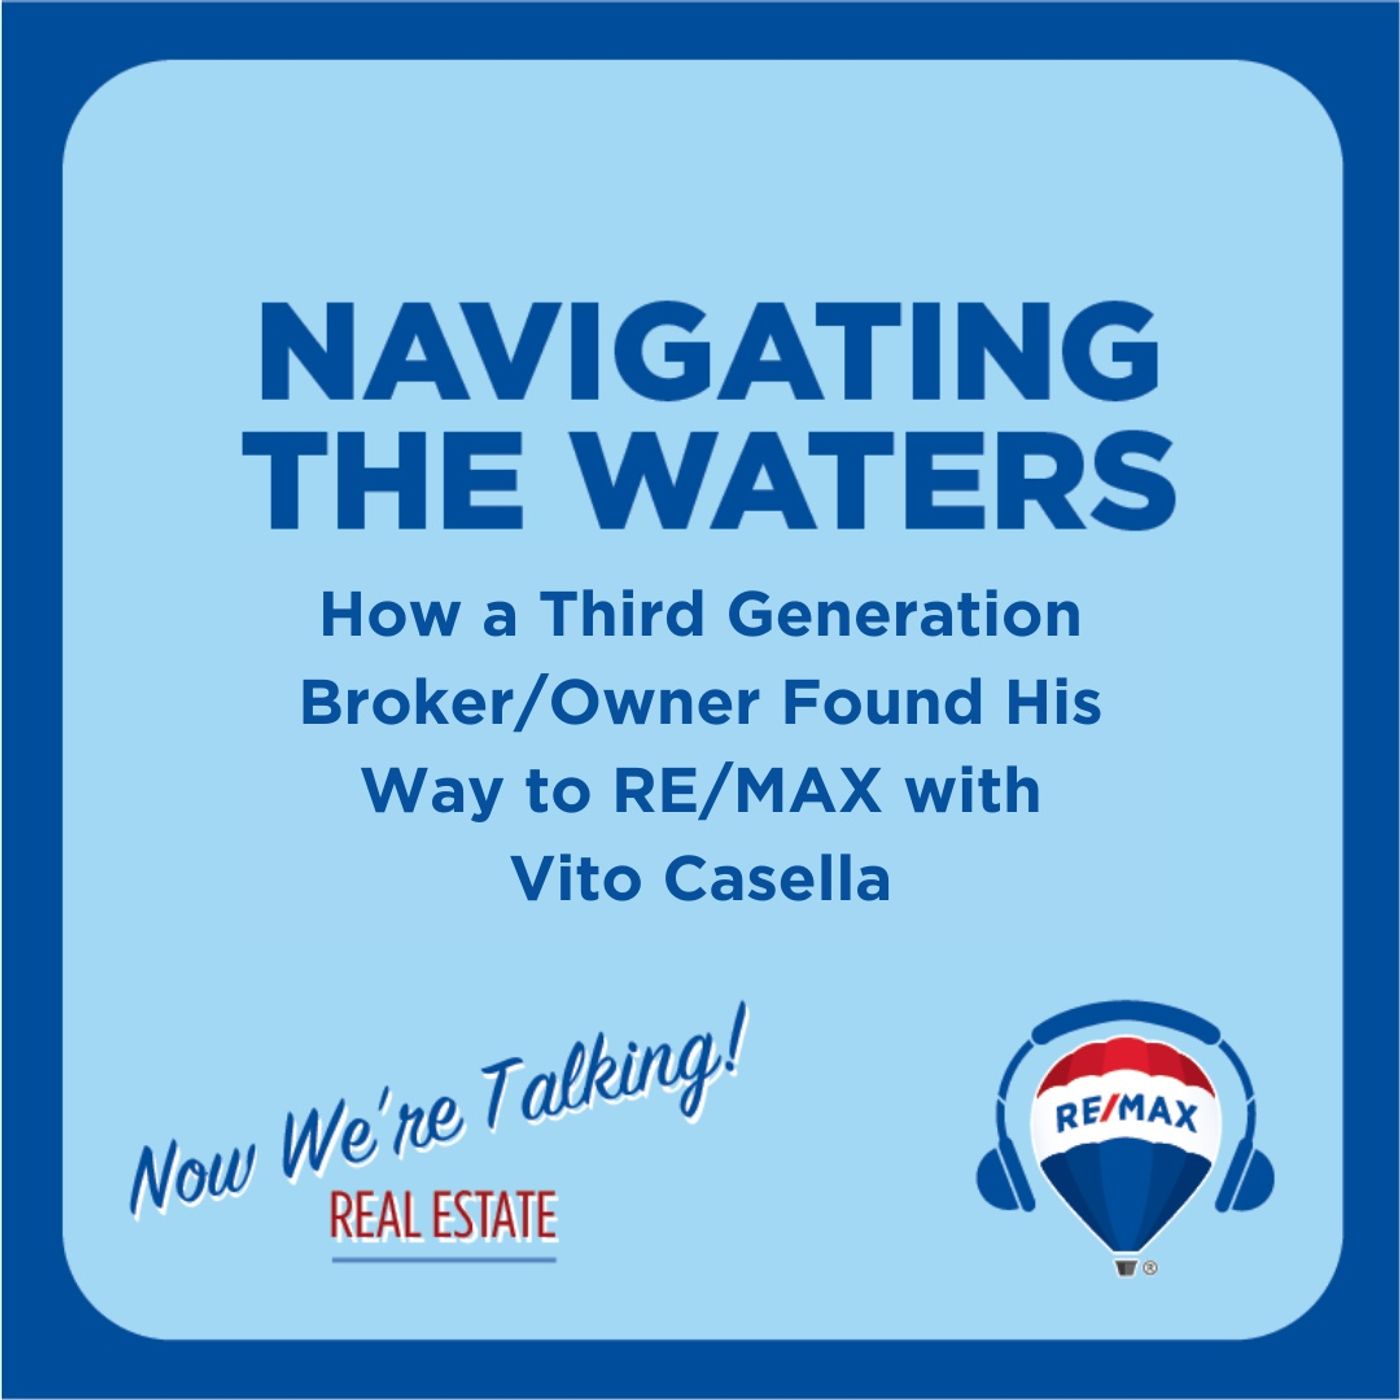 Navigating the Waters: How a Third Generation Broker/Owner, Vito Casella, Found His Way to RE/MAX